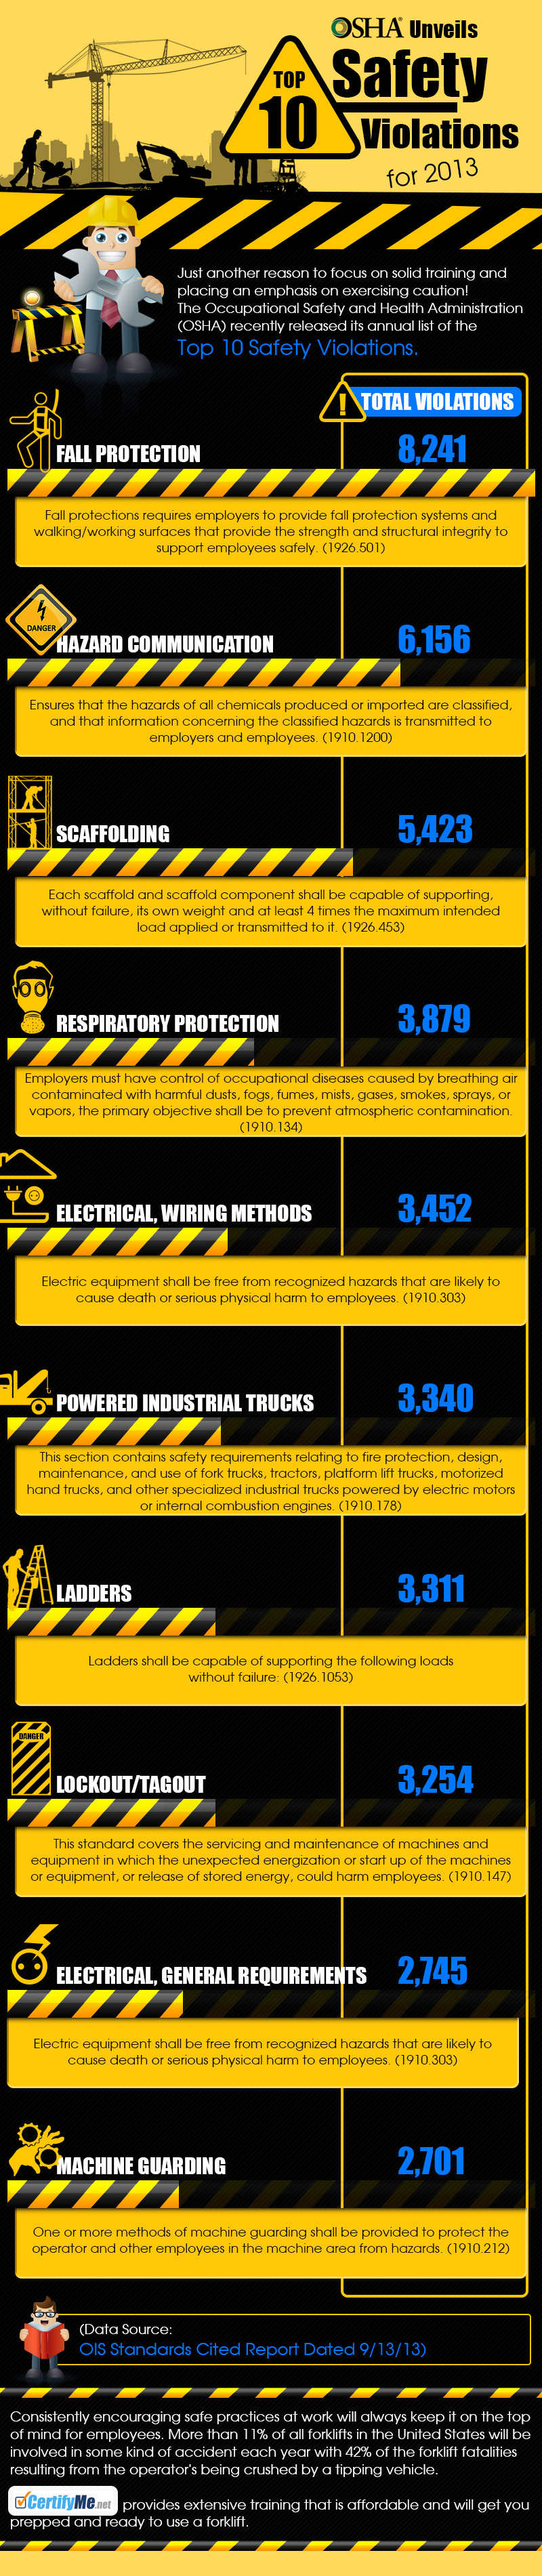 CertifyMe Announces Top OSHA Forklift Safety Violations for 2013